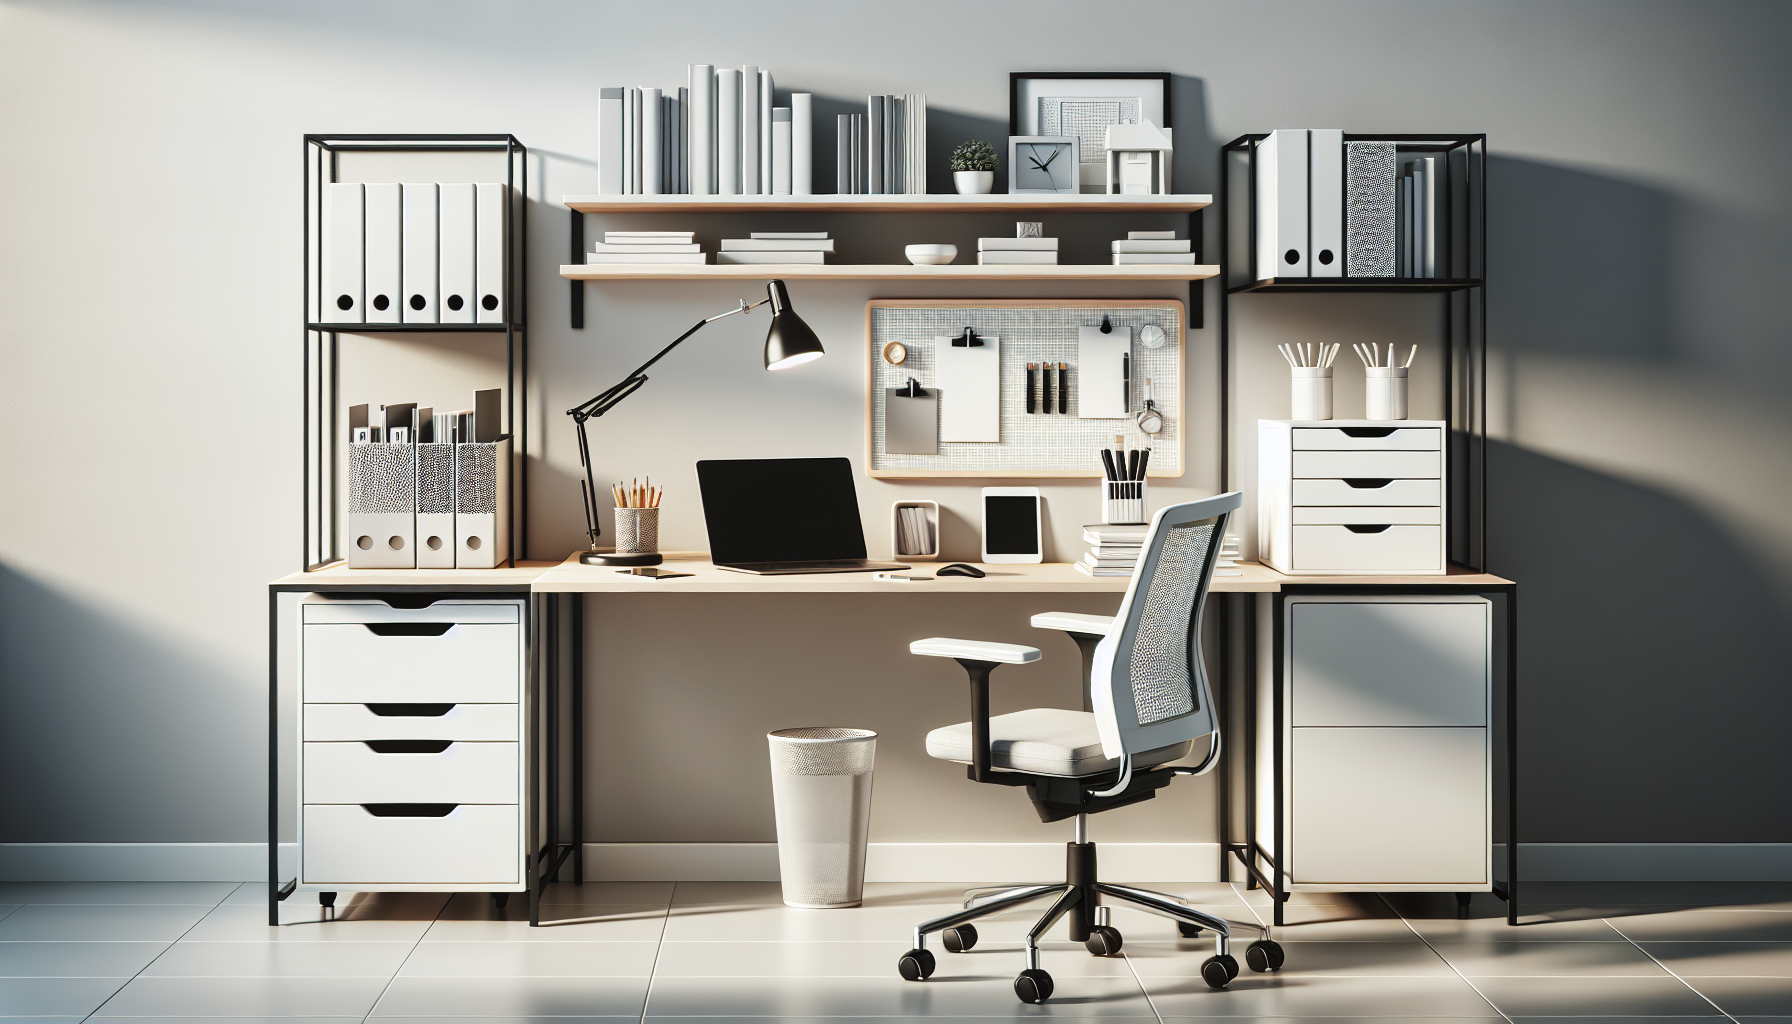 How Much Space Do You Need For A Home Office Desk?